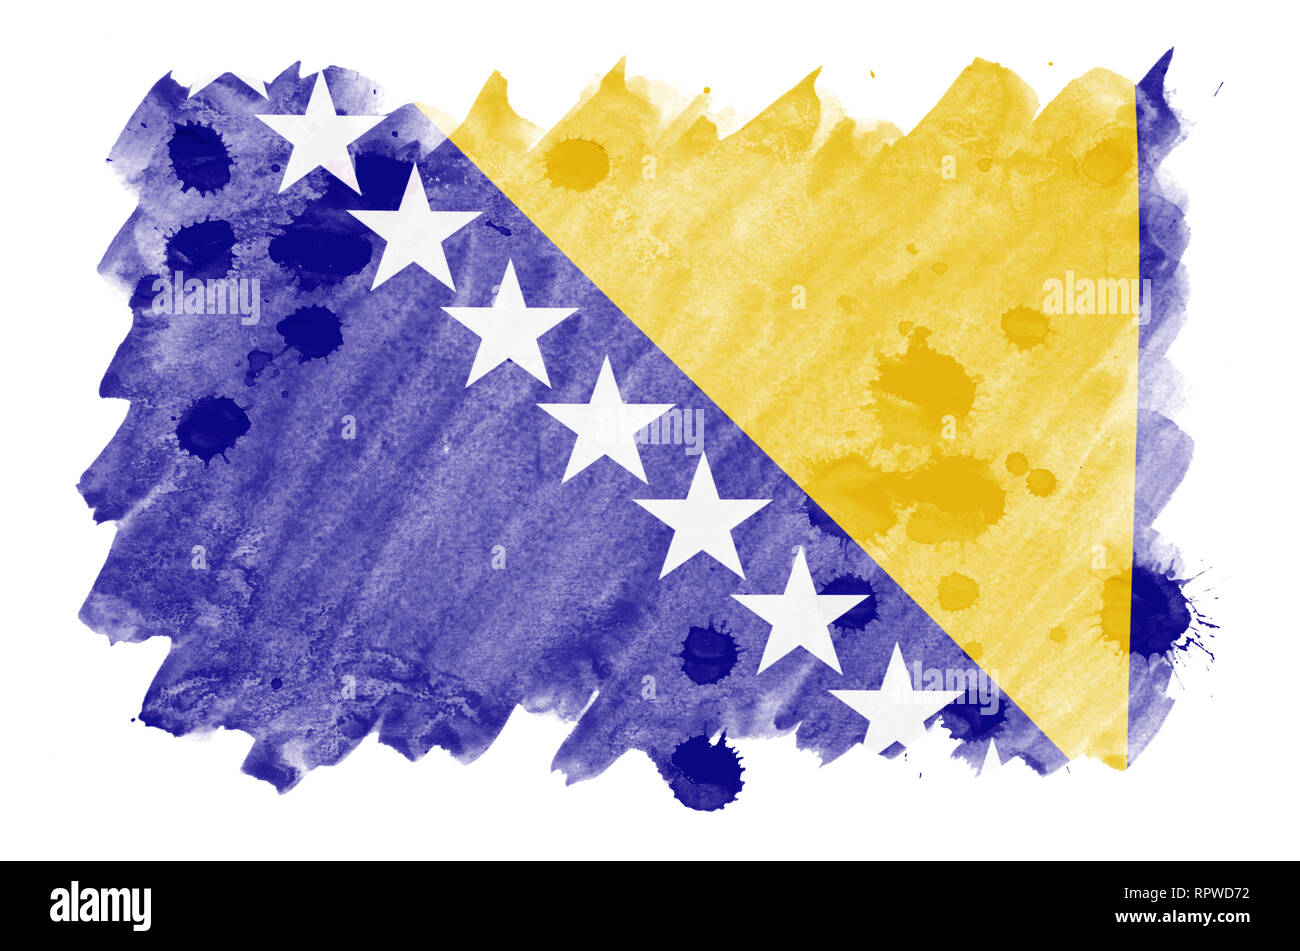 Bosnia and Herzegovina flag  is depicted in liquid watercolor style isolated on white background. Careless paint shading with image of national flag.  Stock Photo